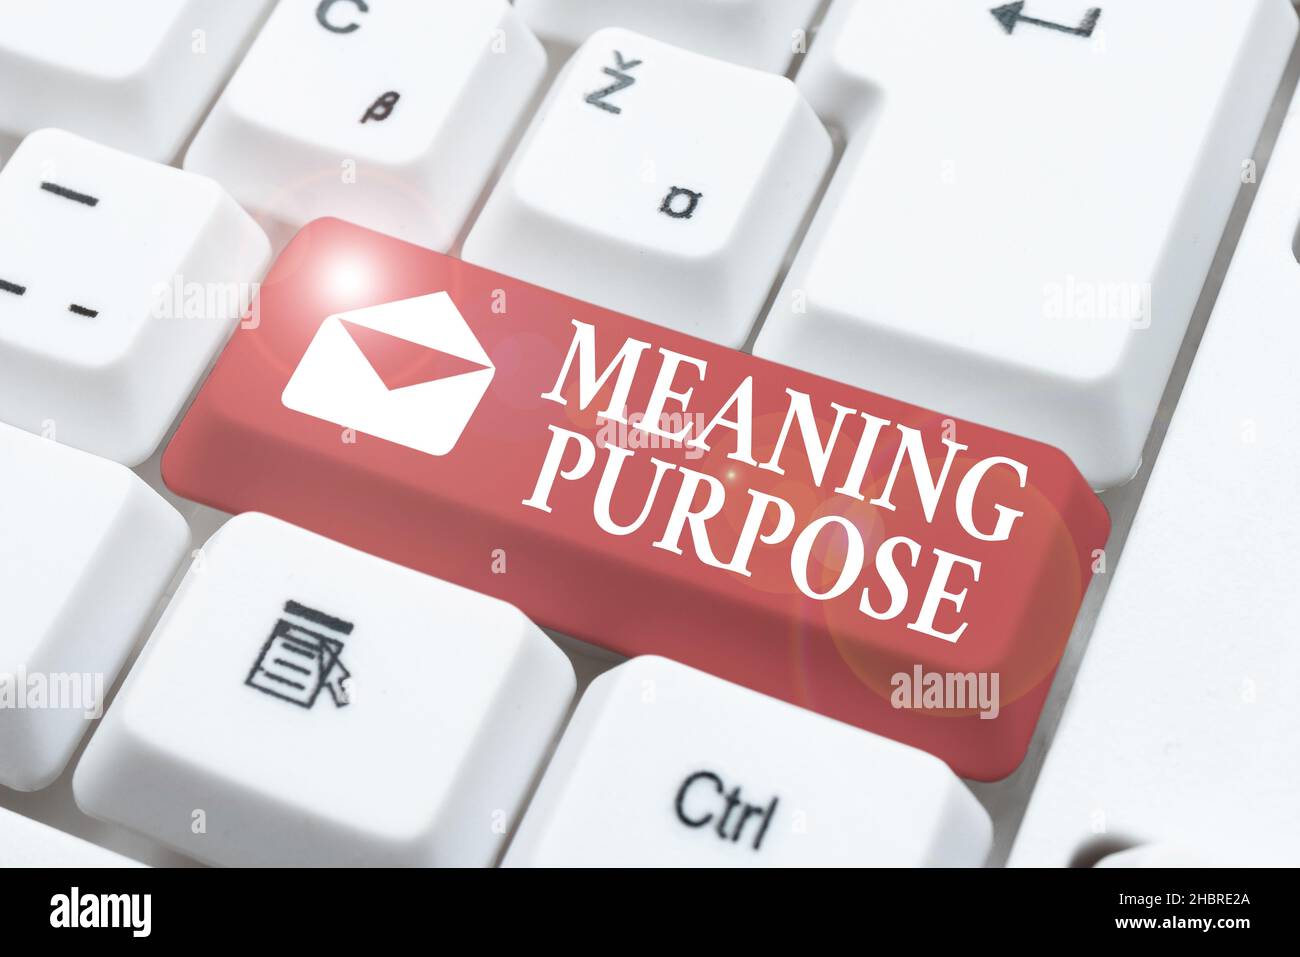 Writing displaying text Meaning Purpose. Concept meaning The reason for which something is done or created and exists Abstract Presenting Ethical Stock Photo